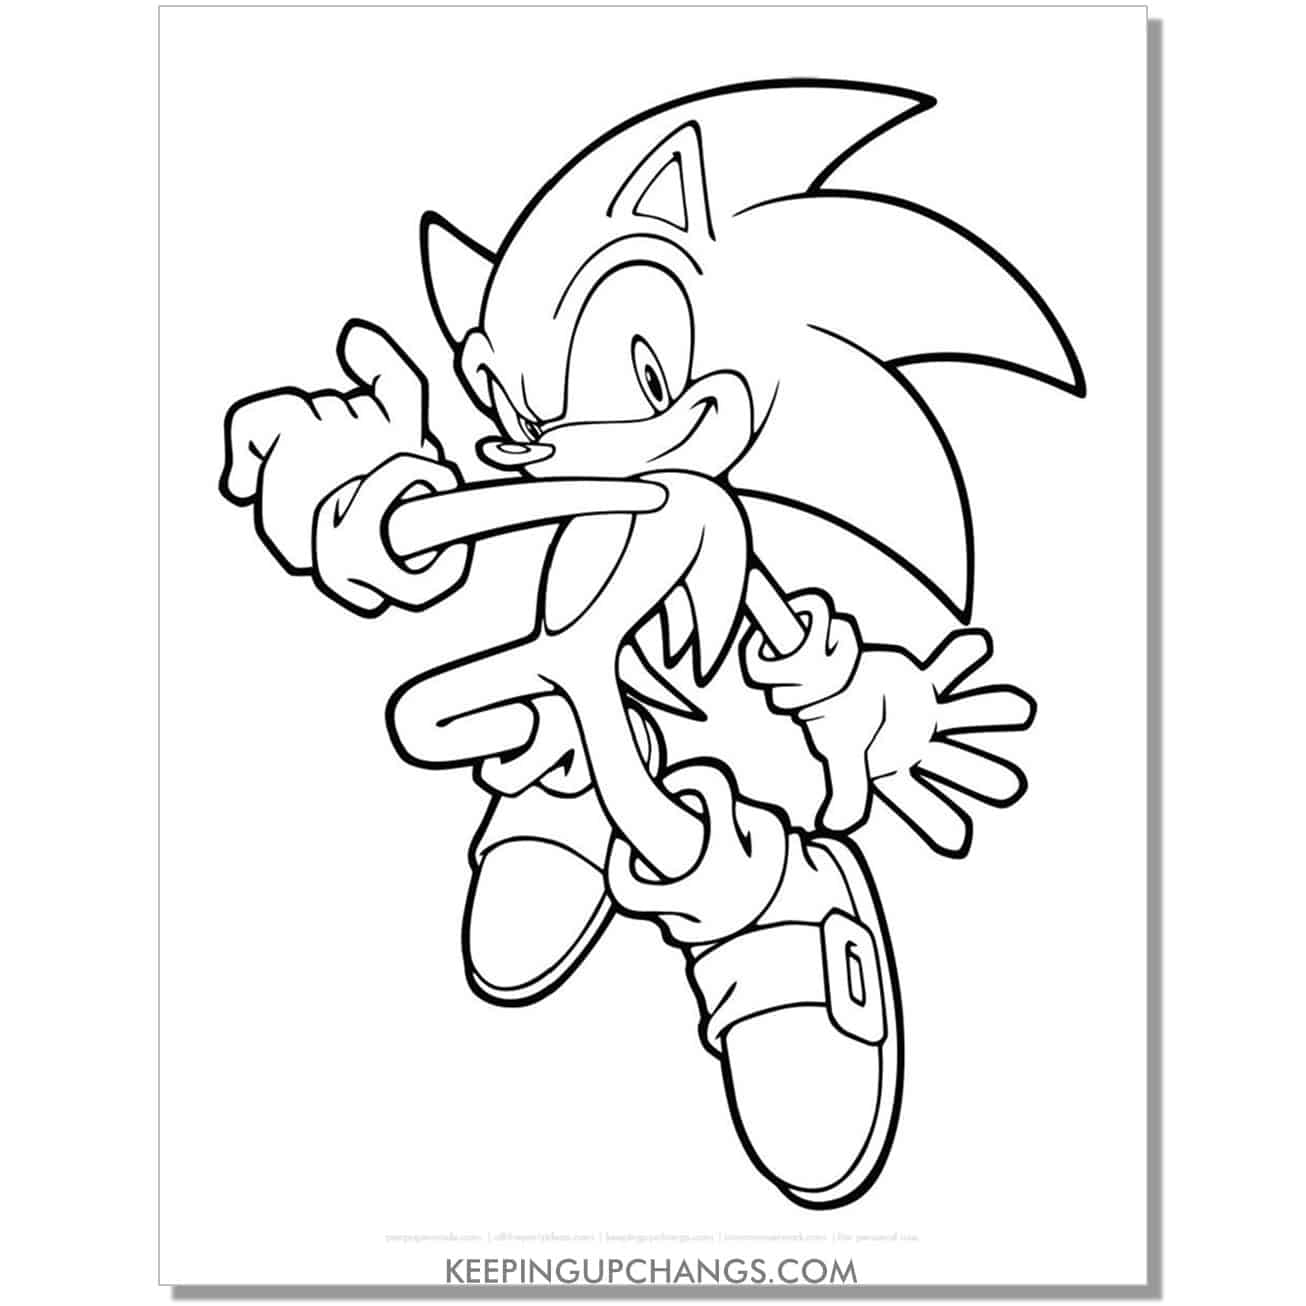 sonic with one arm crossed over body and smiling coloring page.